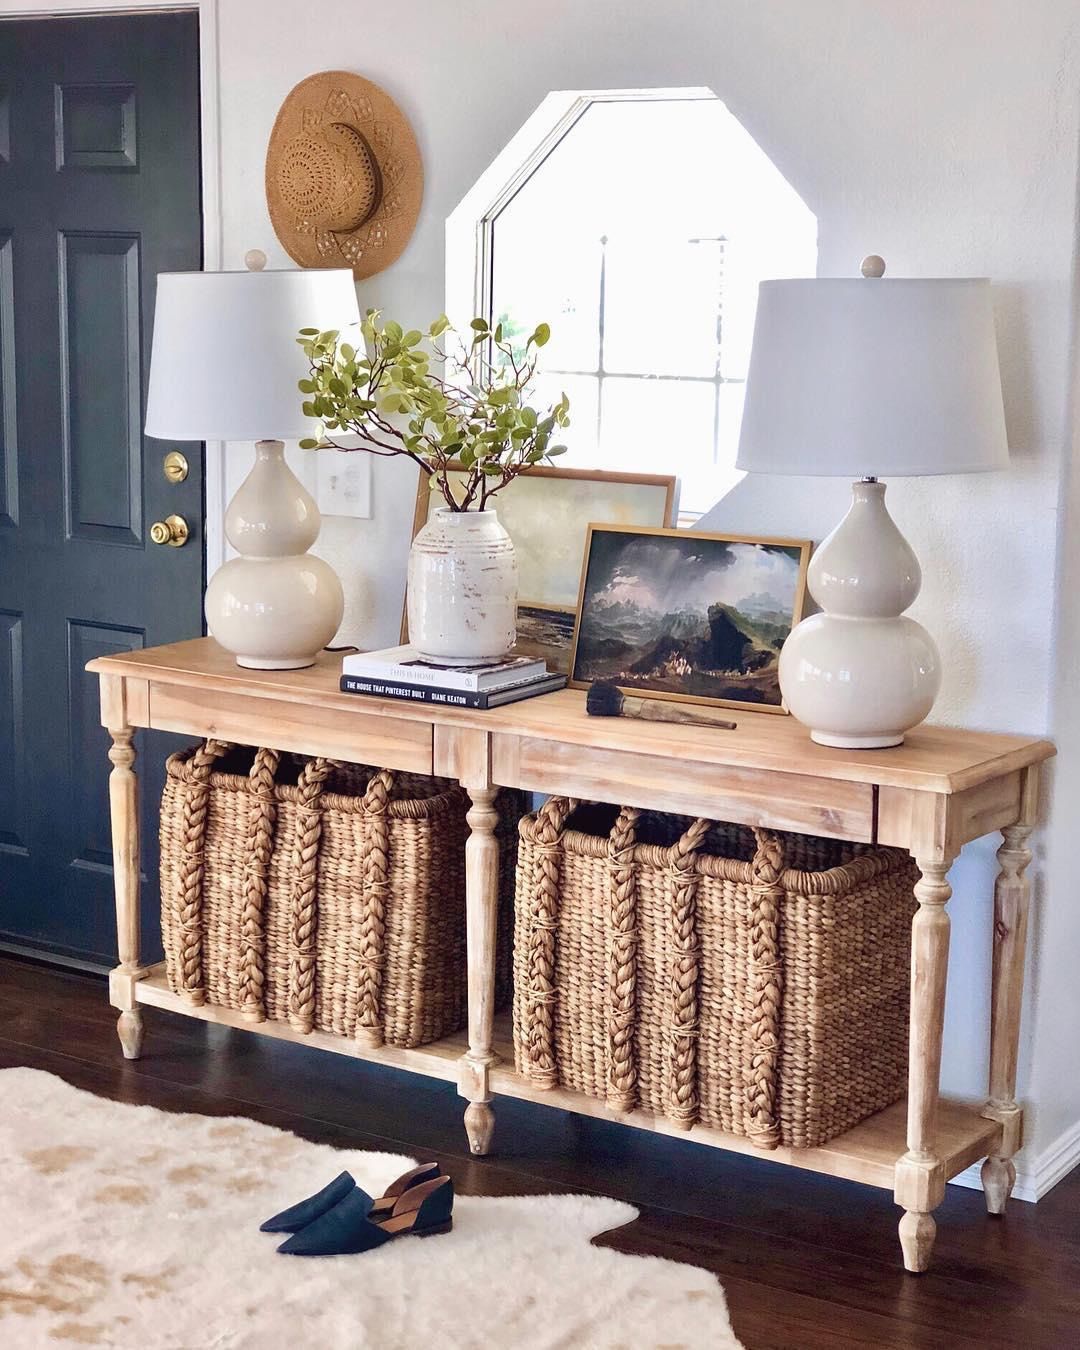 Entryway table paired with a functional basket storage unit for organization